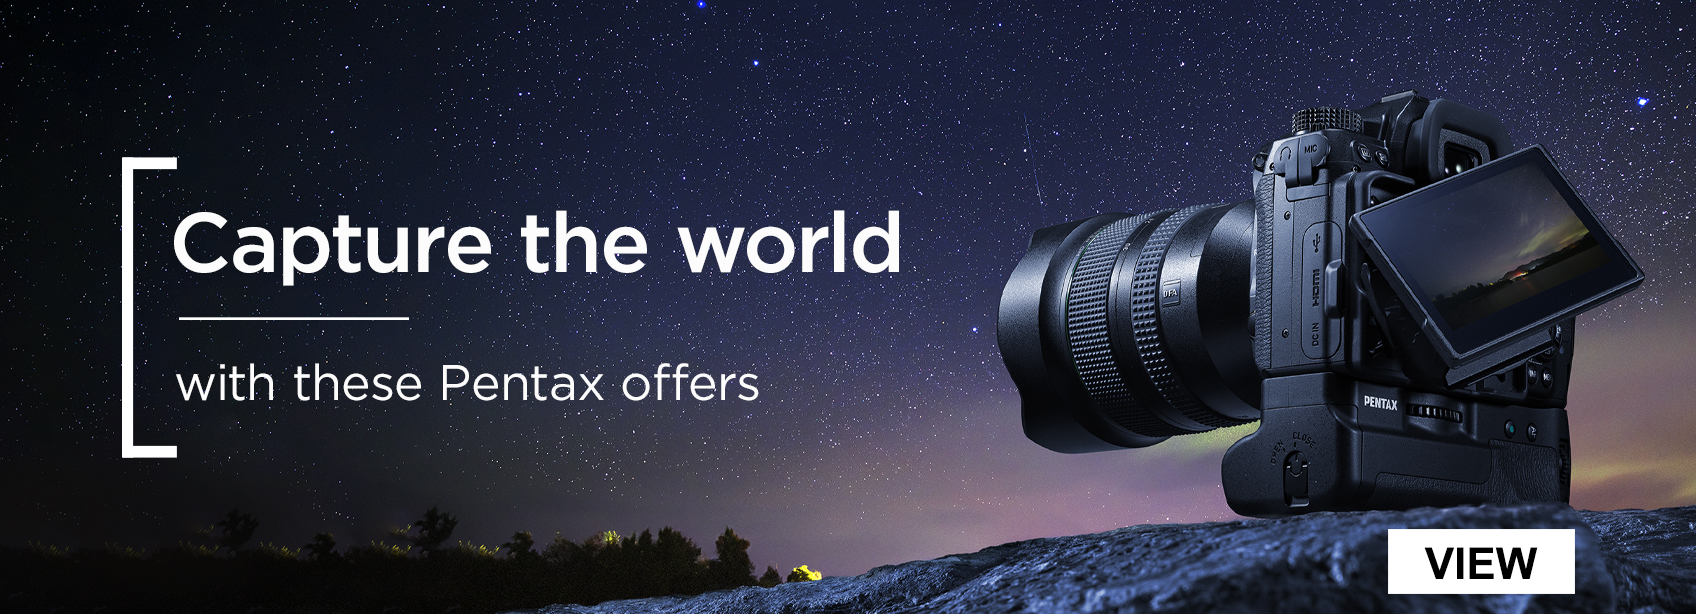 Capture the world with these Pentax offers